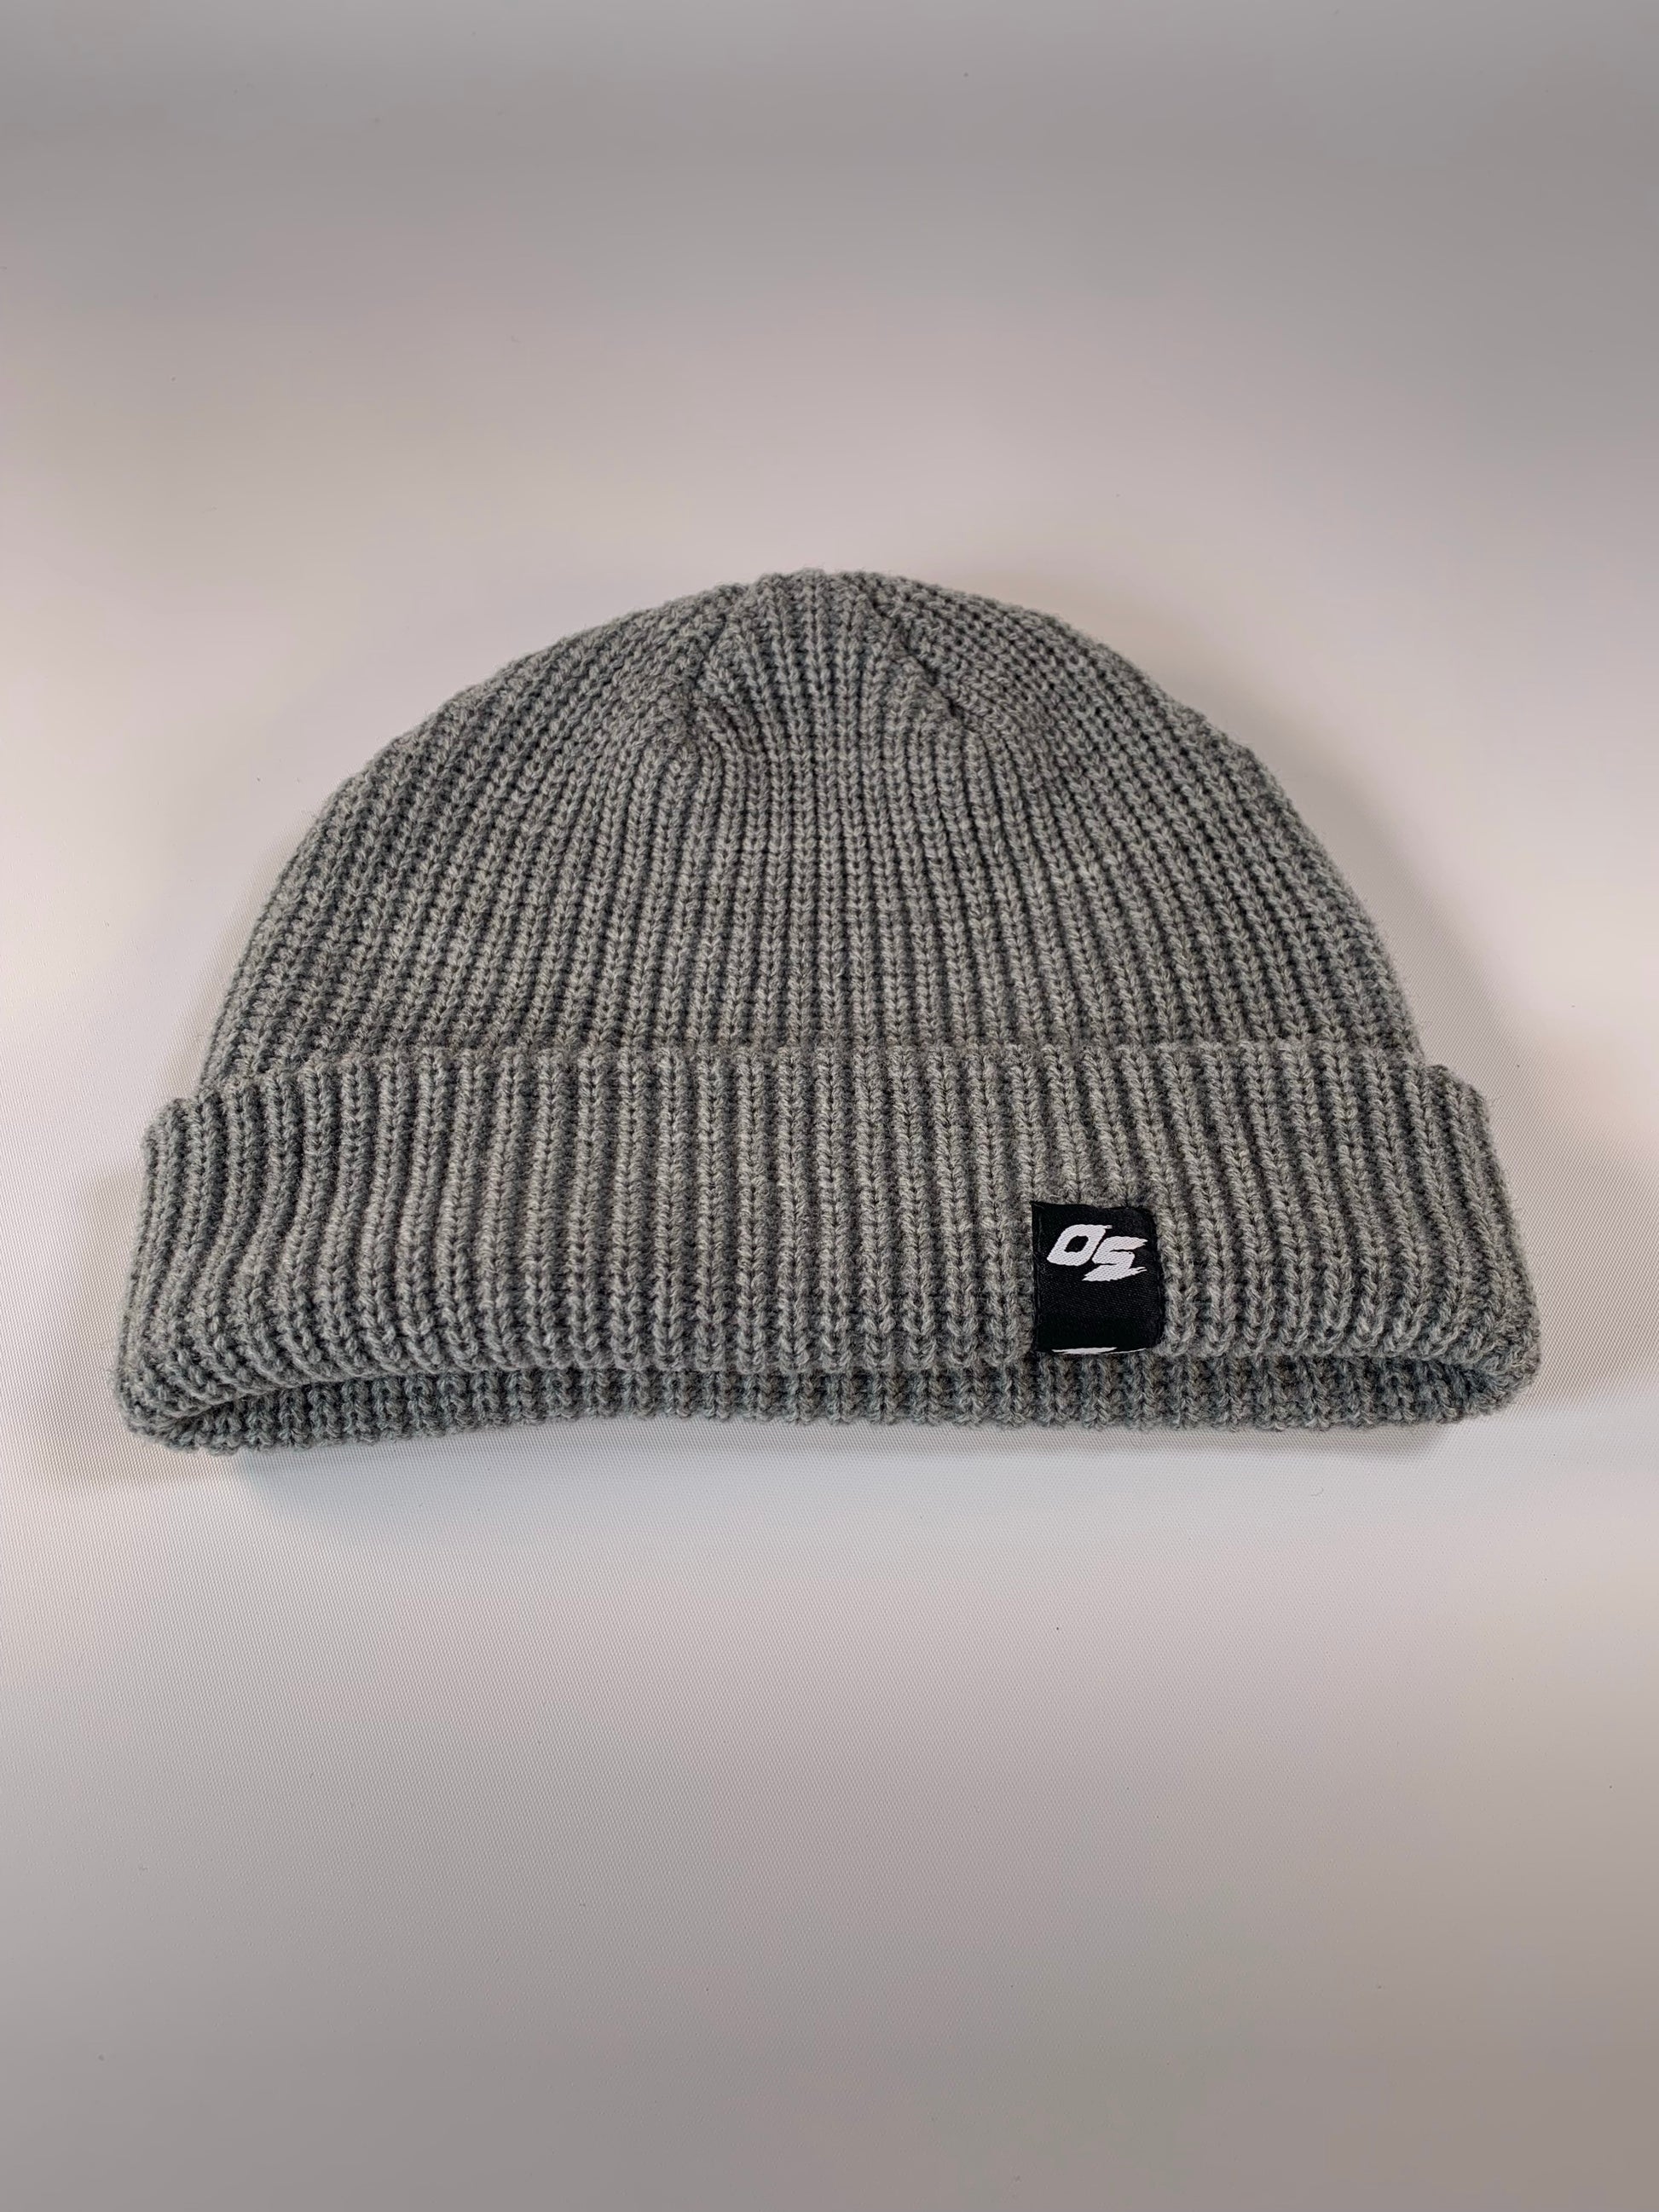 OS® CABLE BEANIE- grey – OTSDR SPORTS